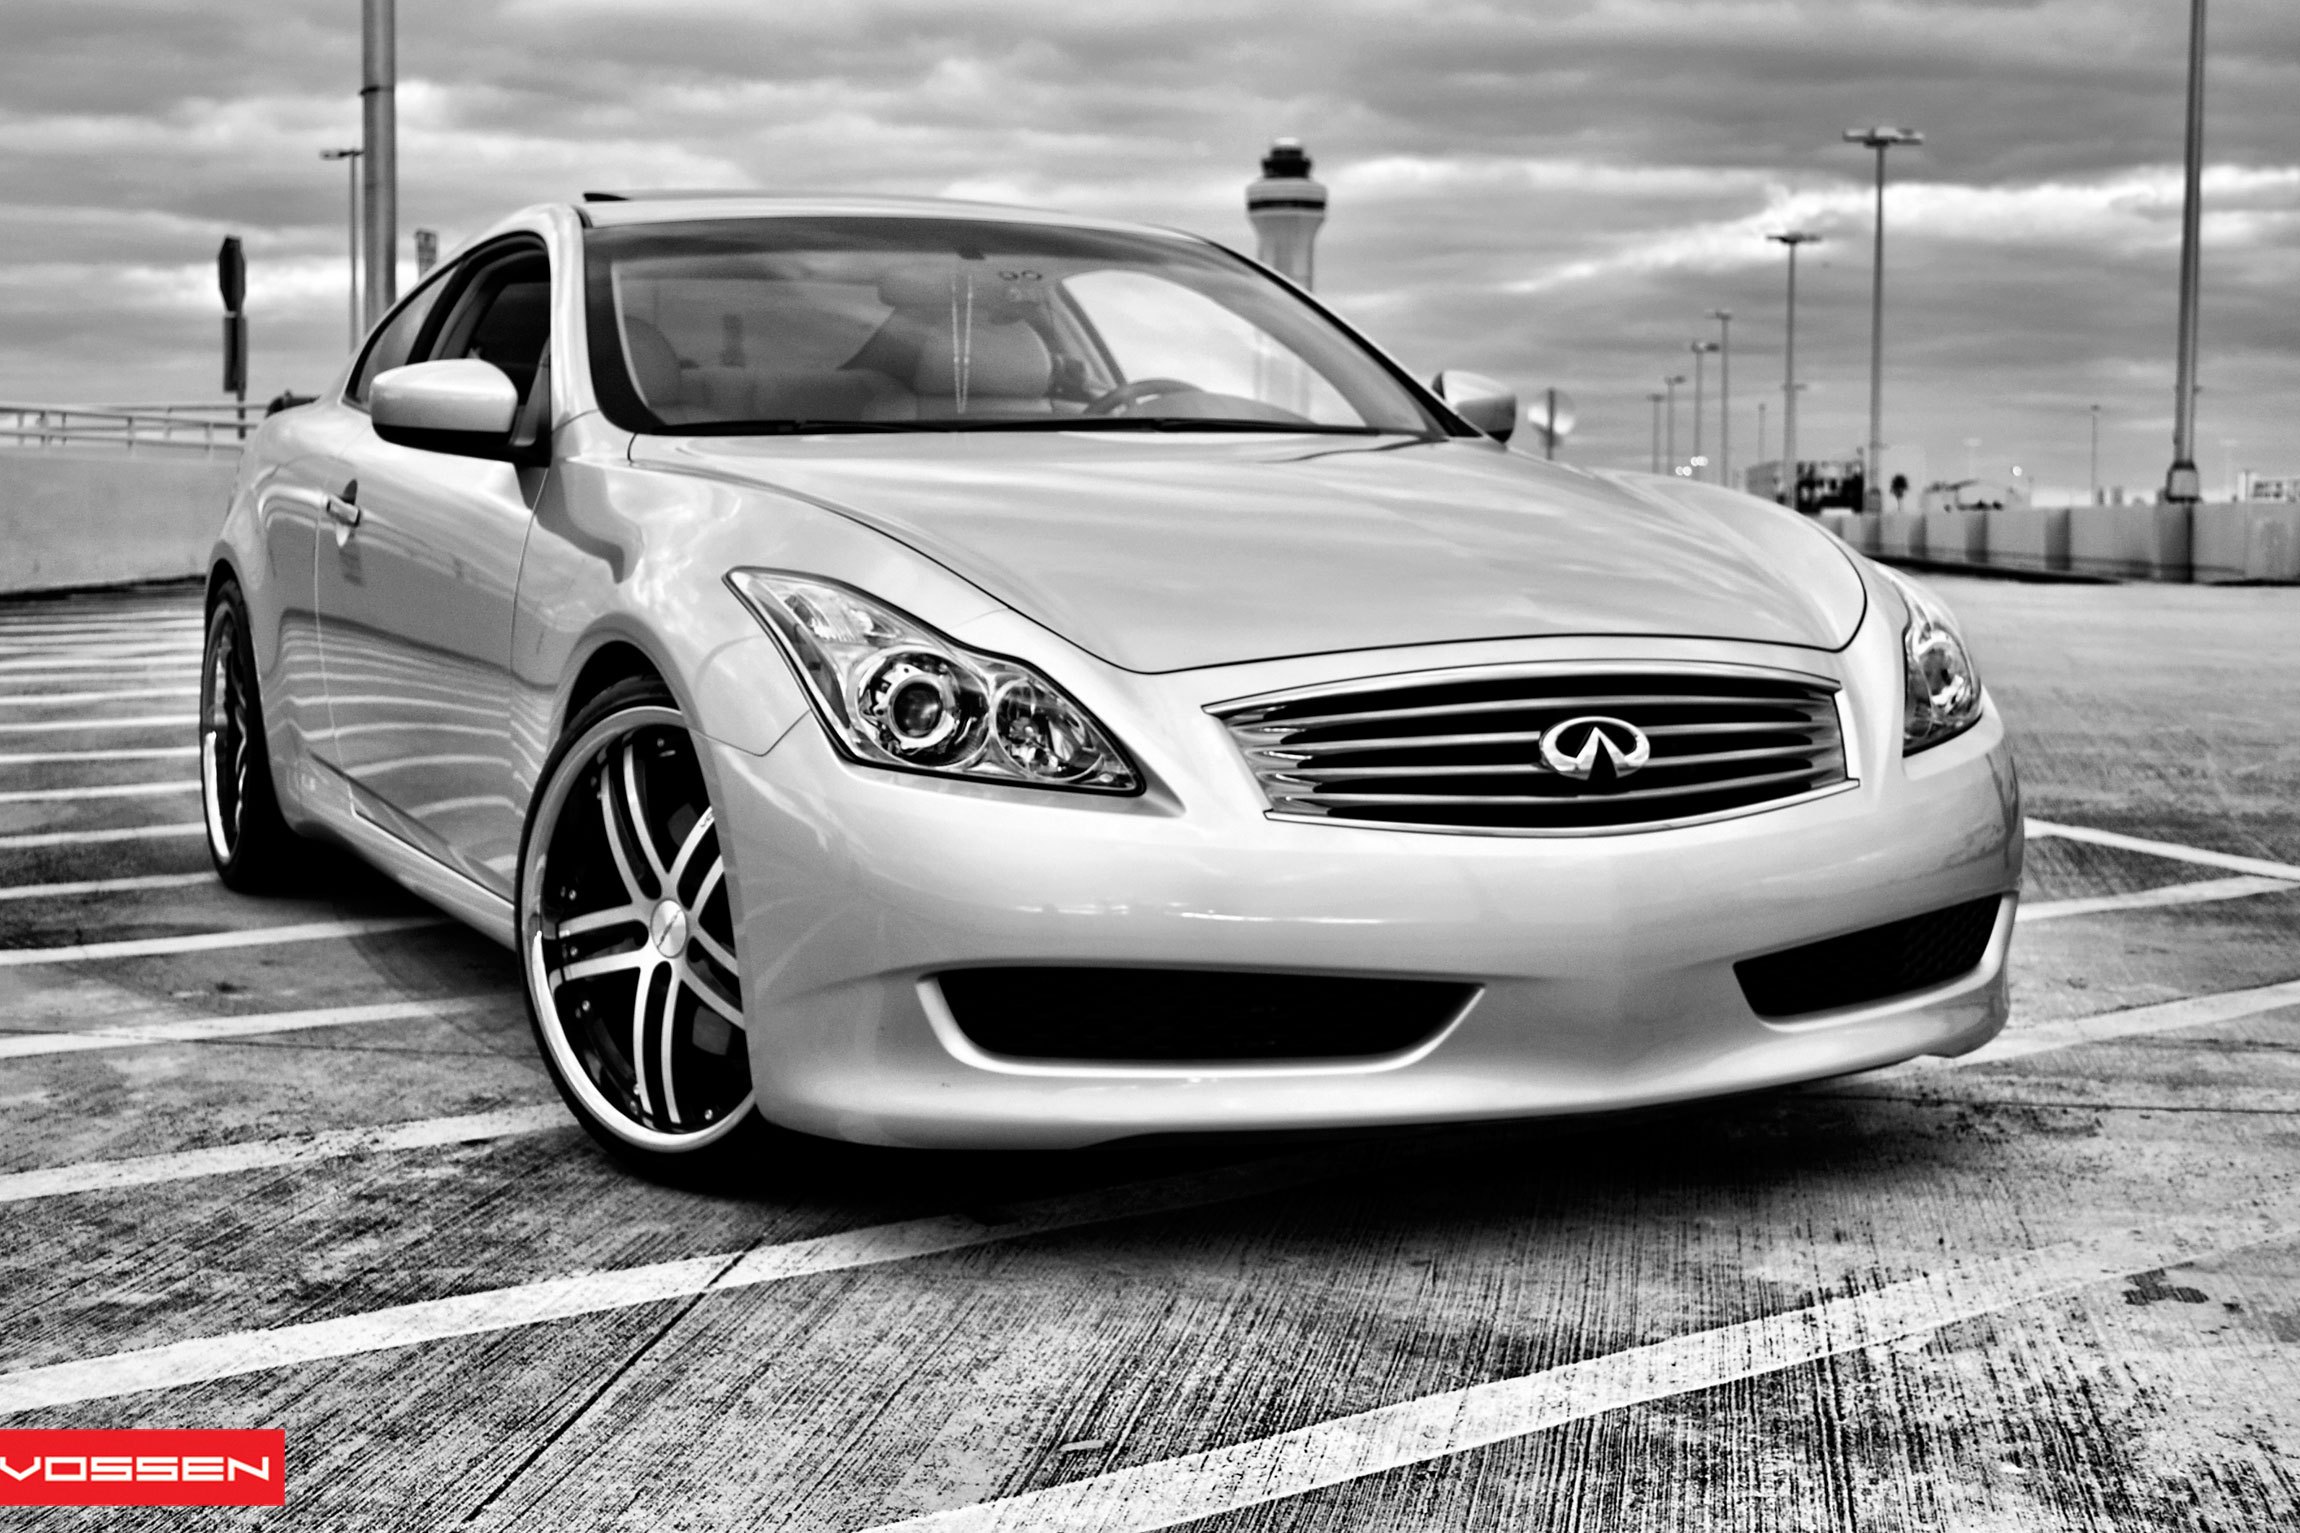 Chrome Grille on Custom Silver Infiniti G37 - Photo by Vossen